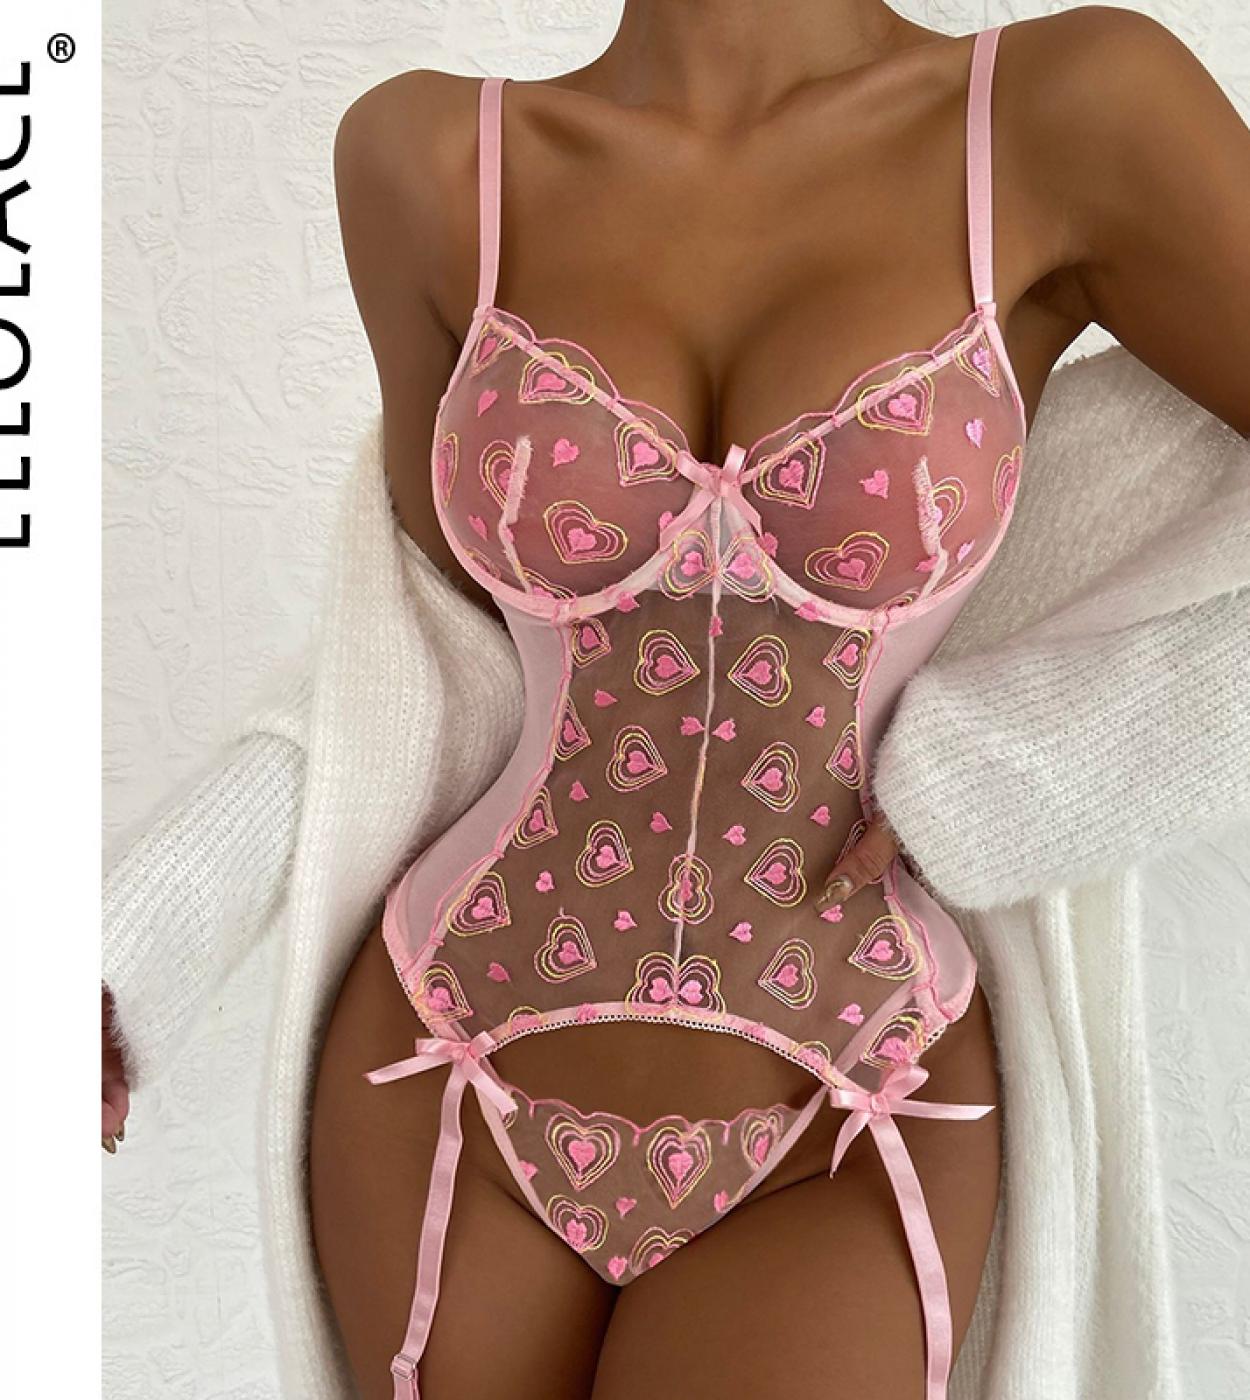 Ellolace Love Heart Shaped Lingerie Fetish Underwear That Can See Romance Valentines Day Set Woman 2 Pieces Lace Intima